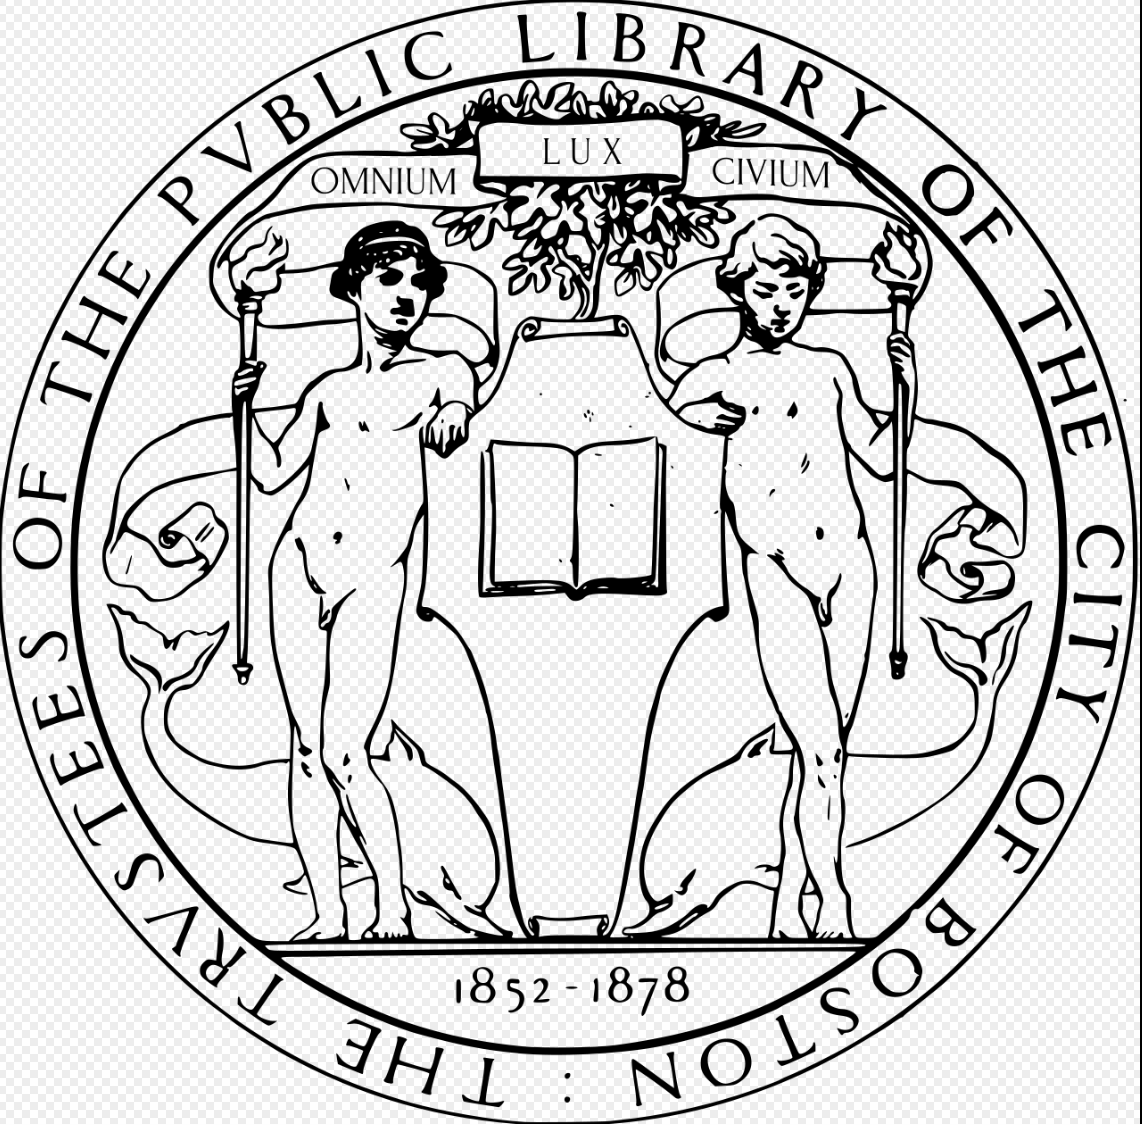 The Seal of the Trustees of the Boston Public Library, as designed by Augustus Saint-Gaudens